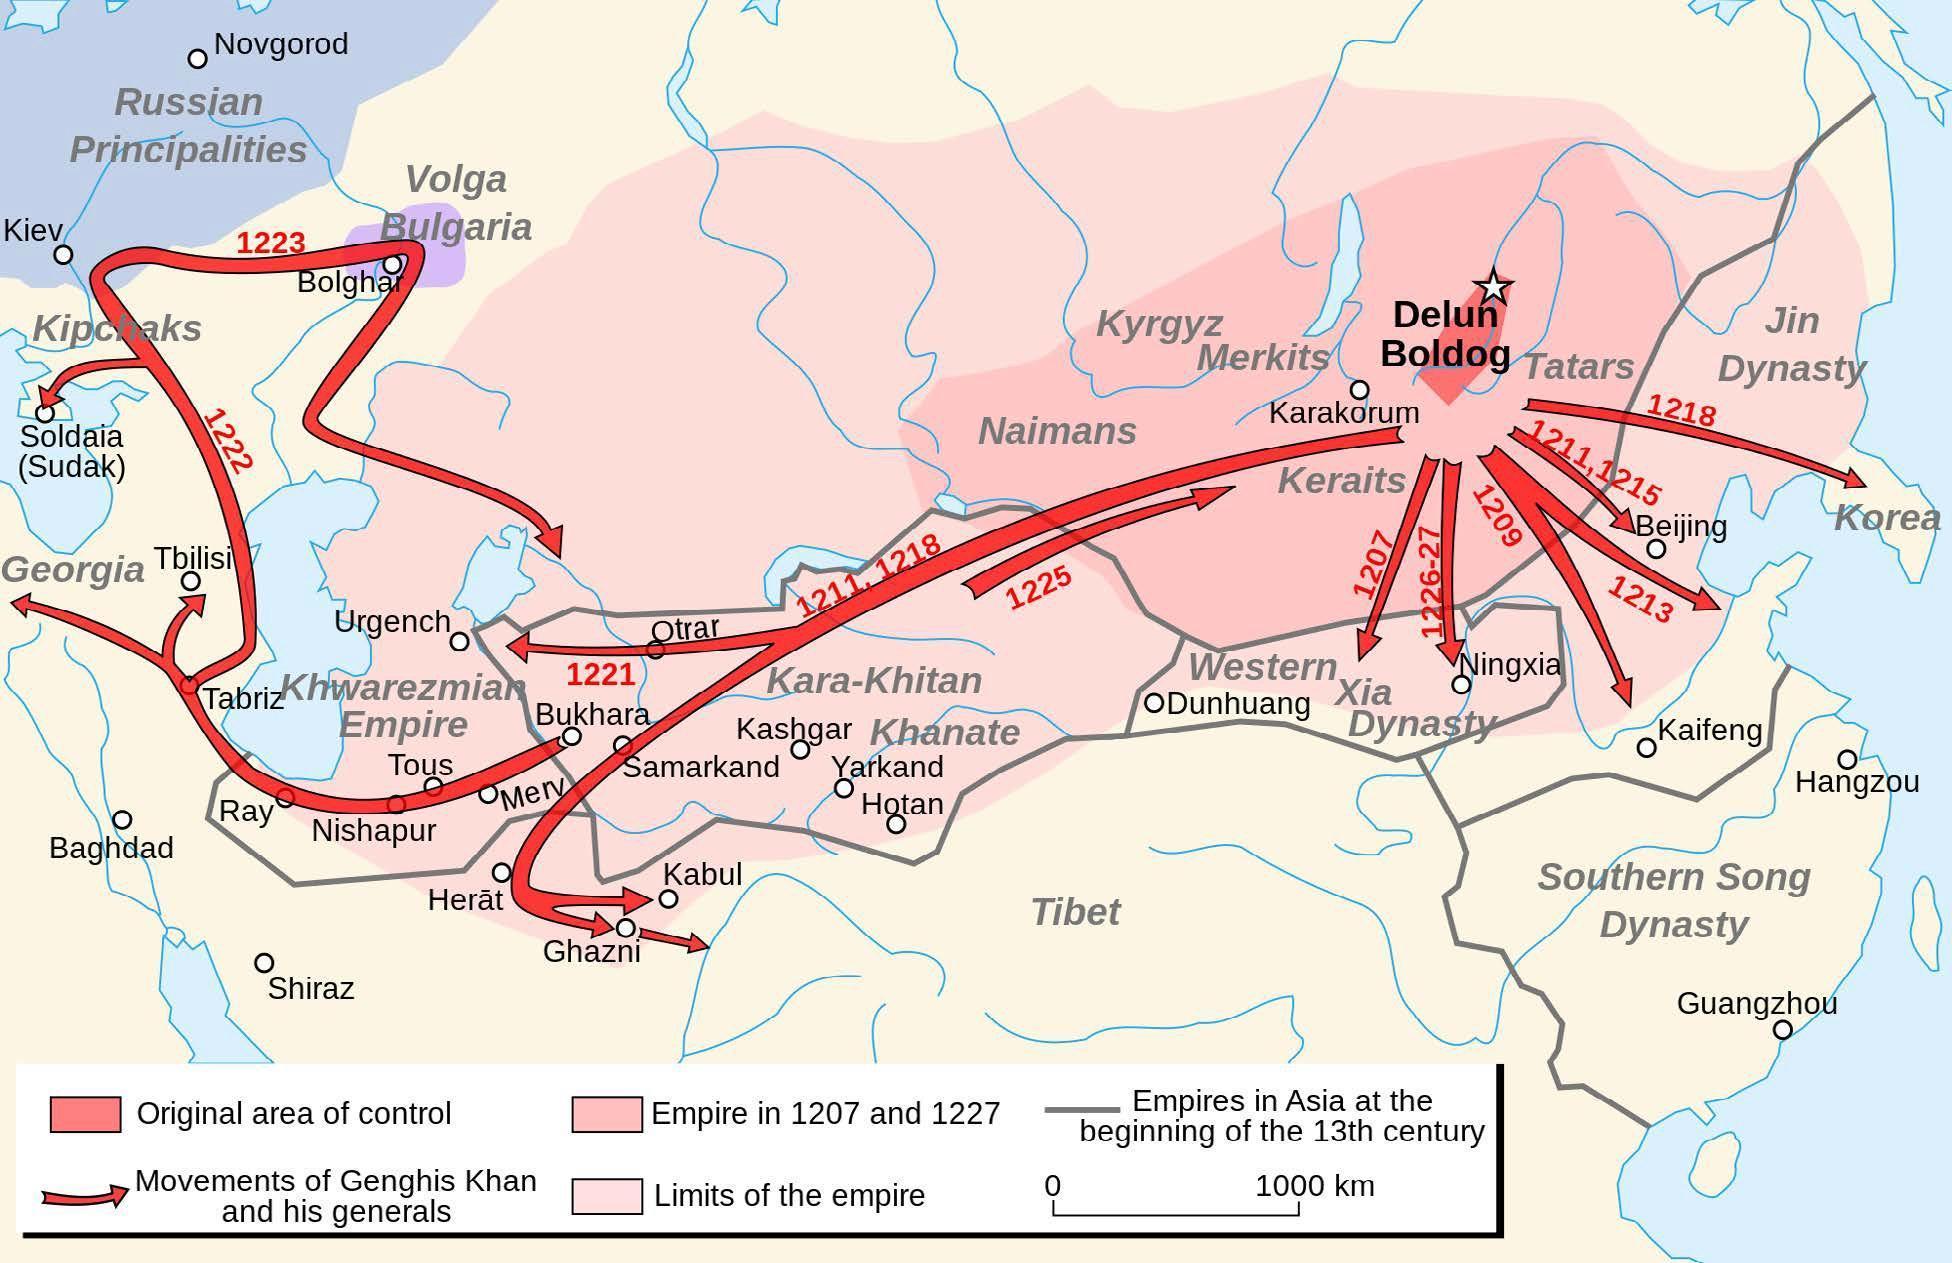 Map of Mongol Conquests Under Genghis Khan